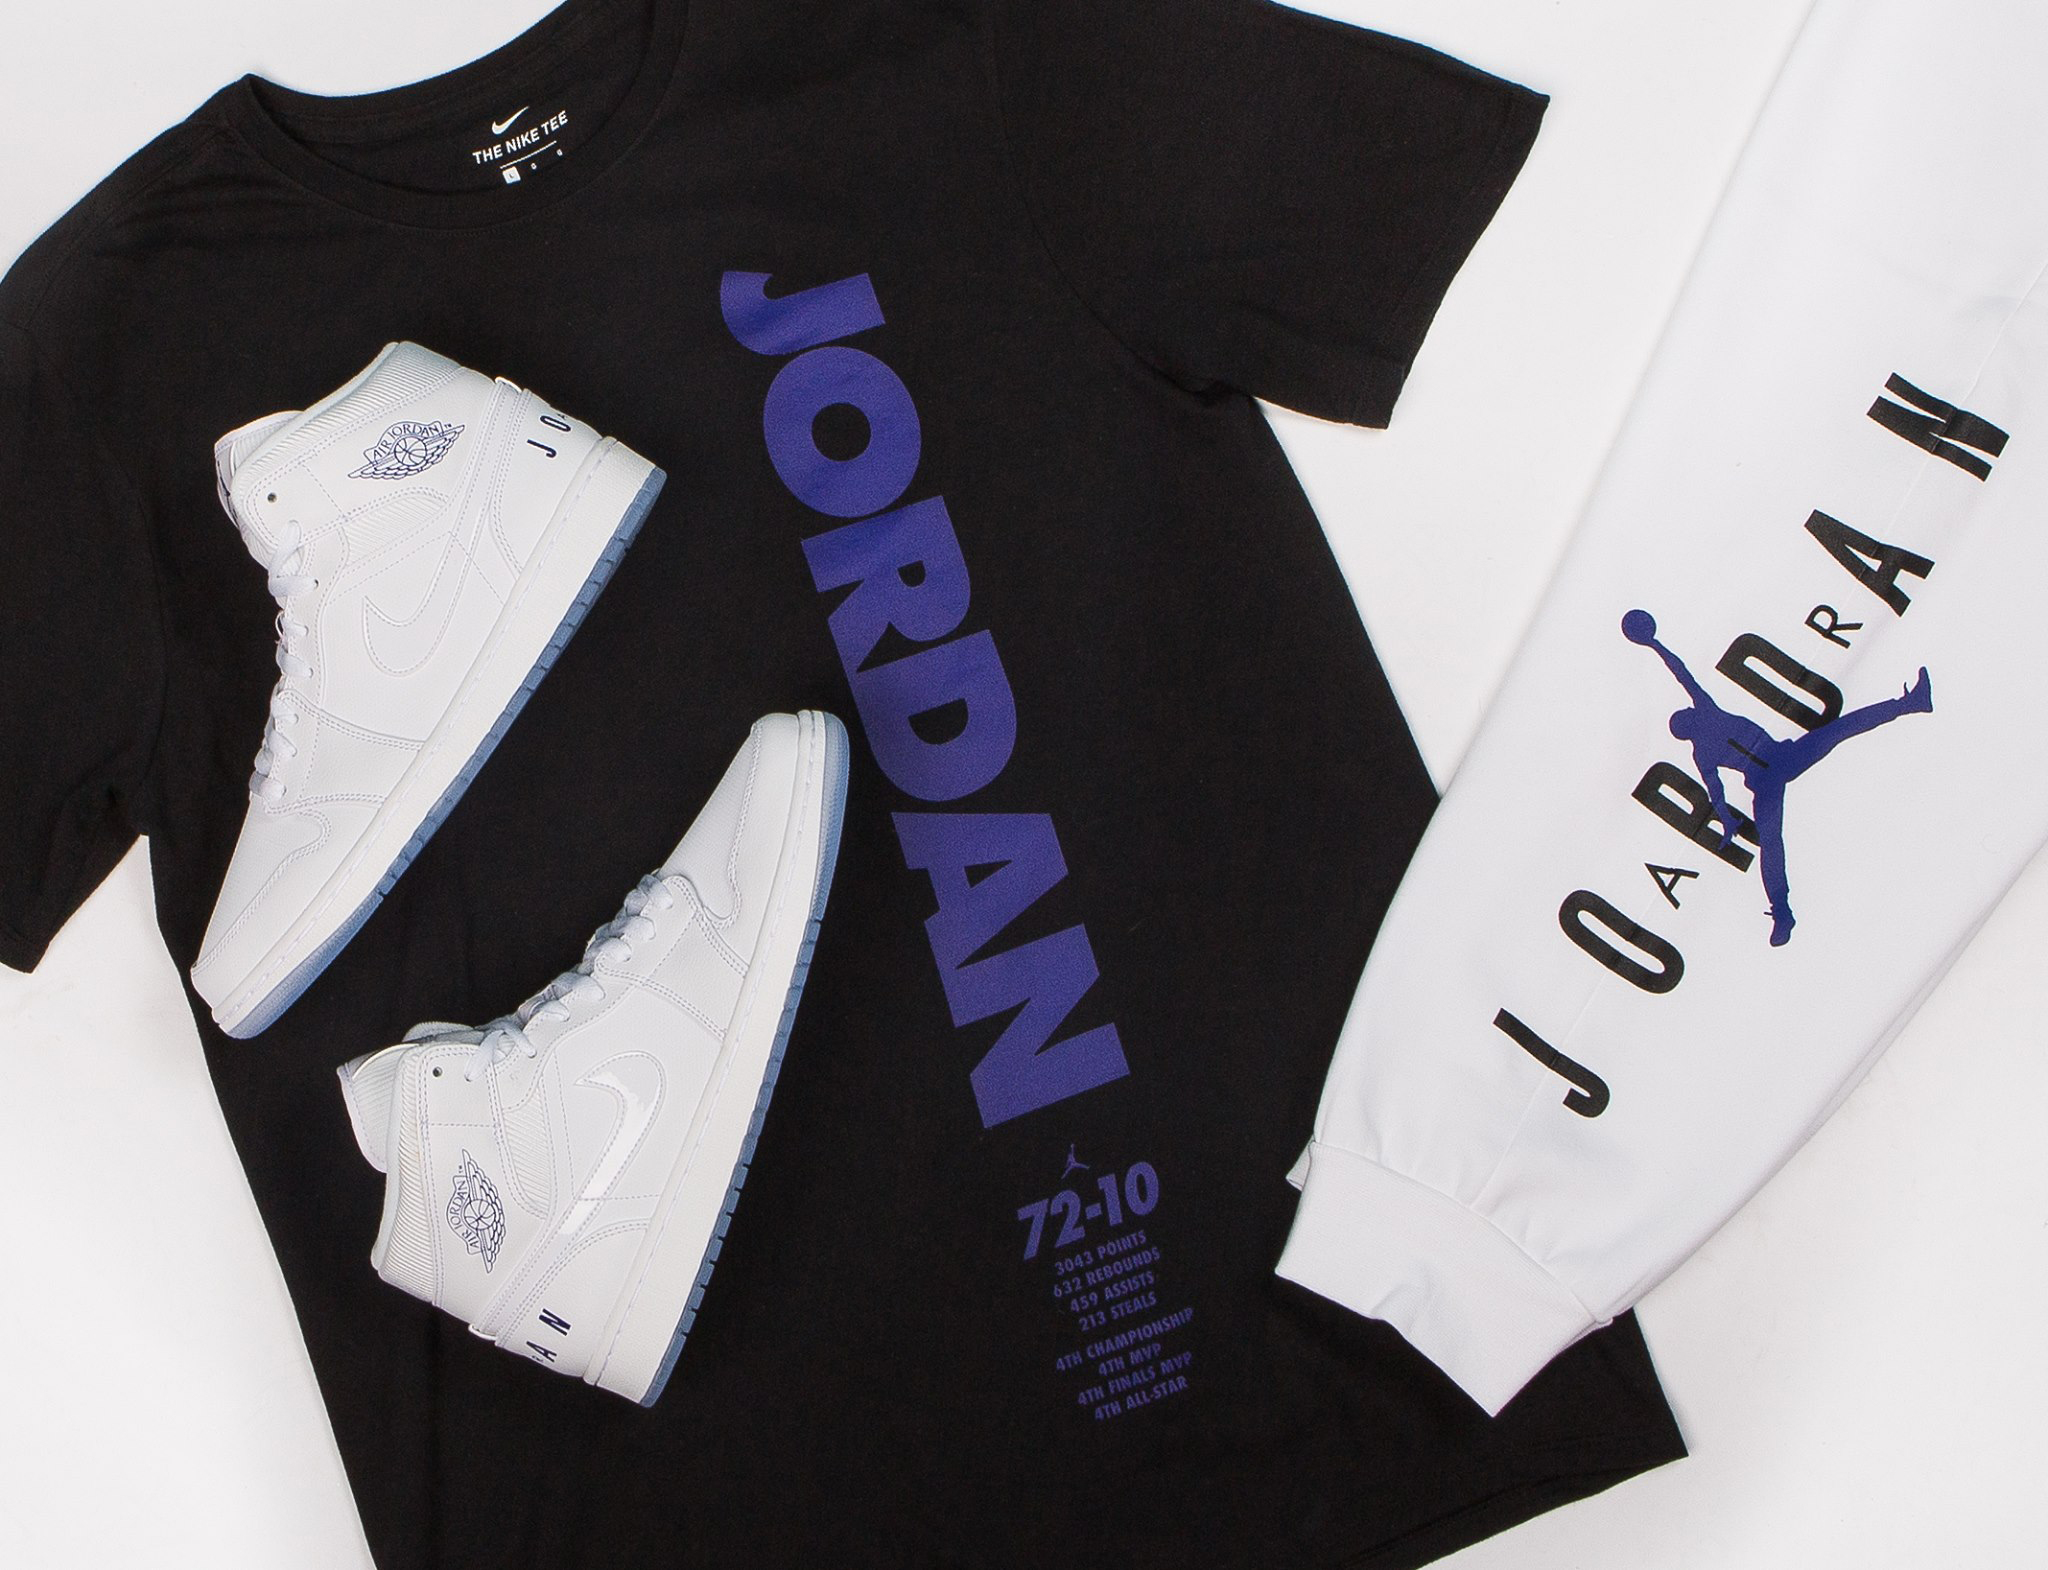 shirts to match concord 11